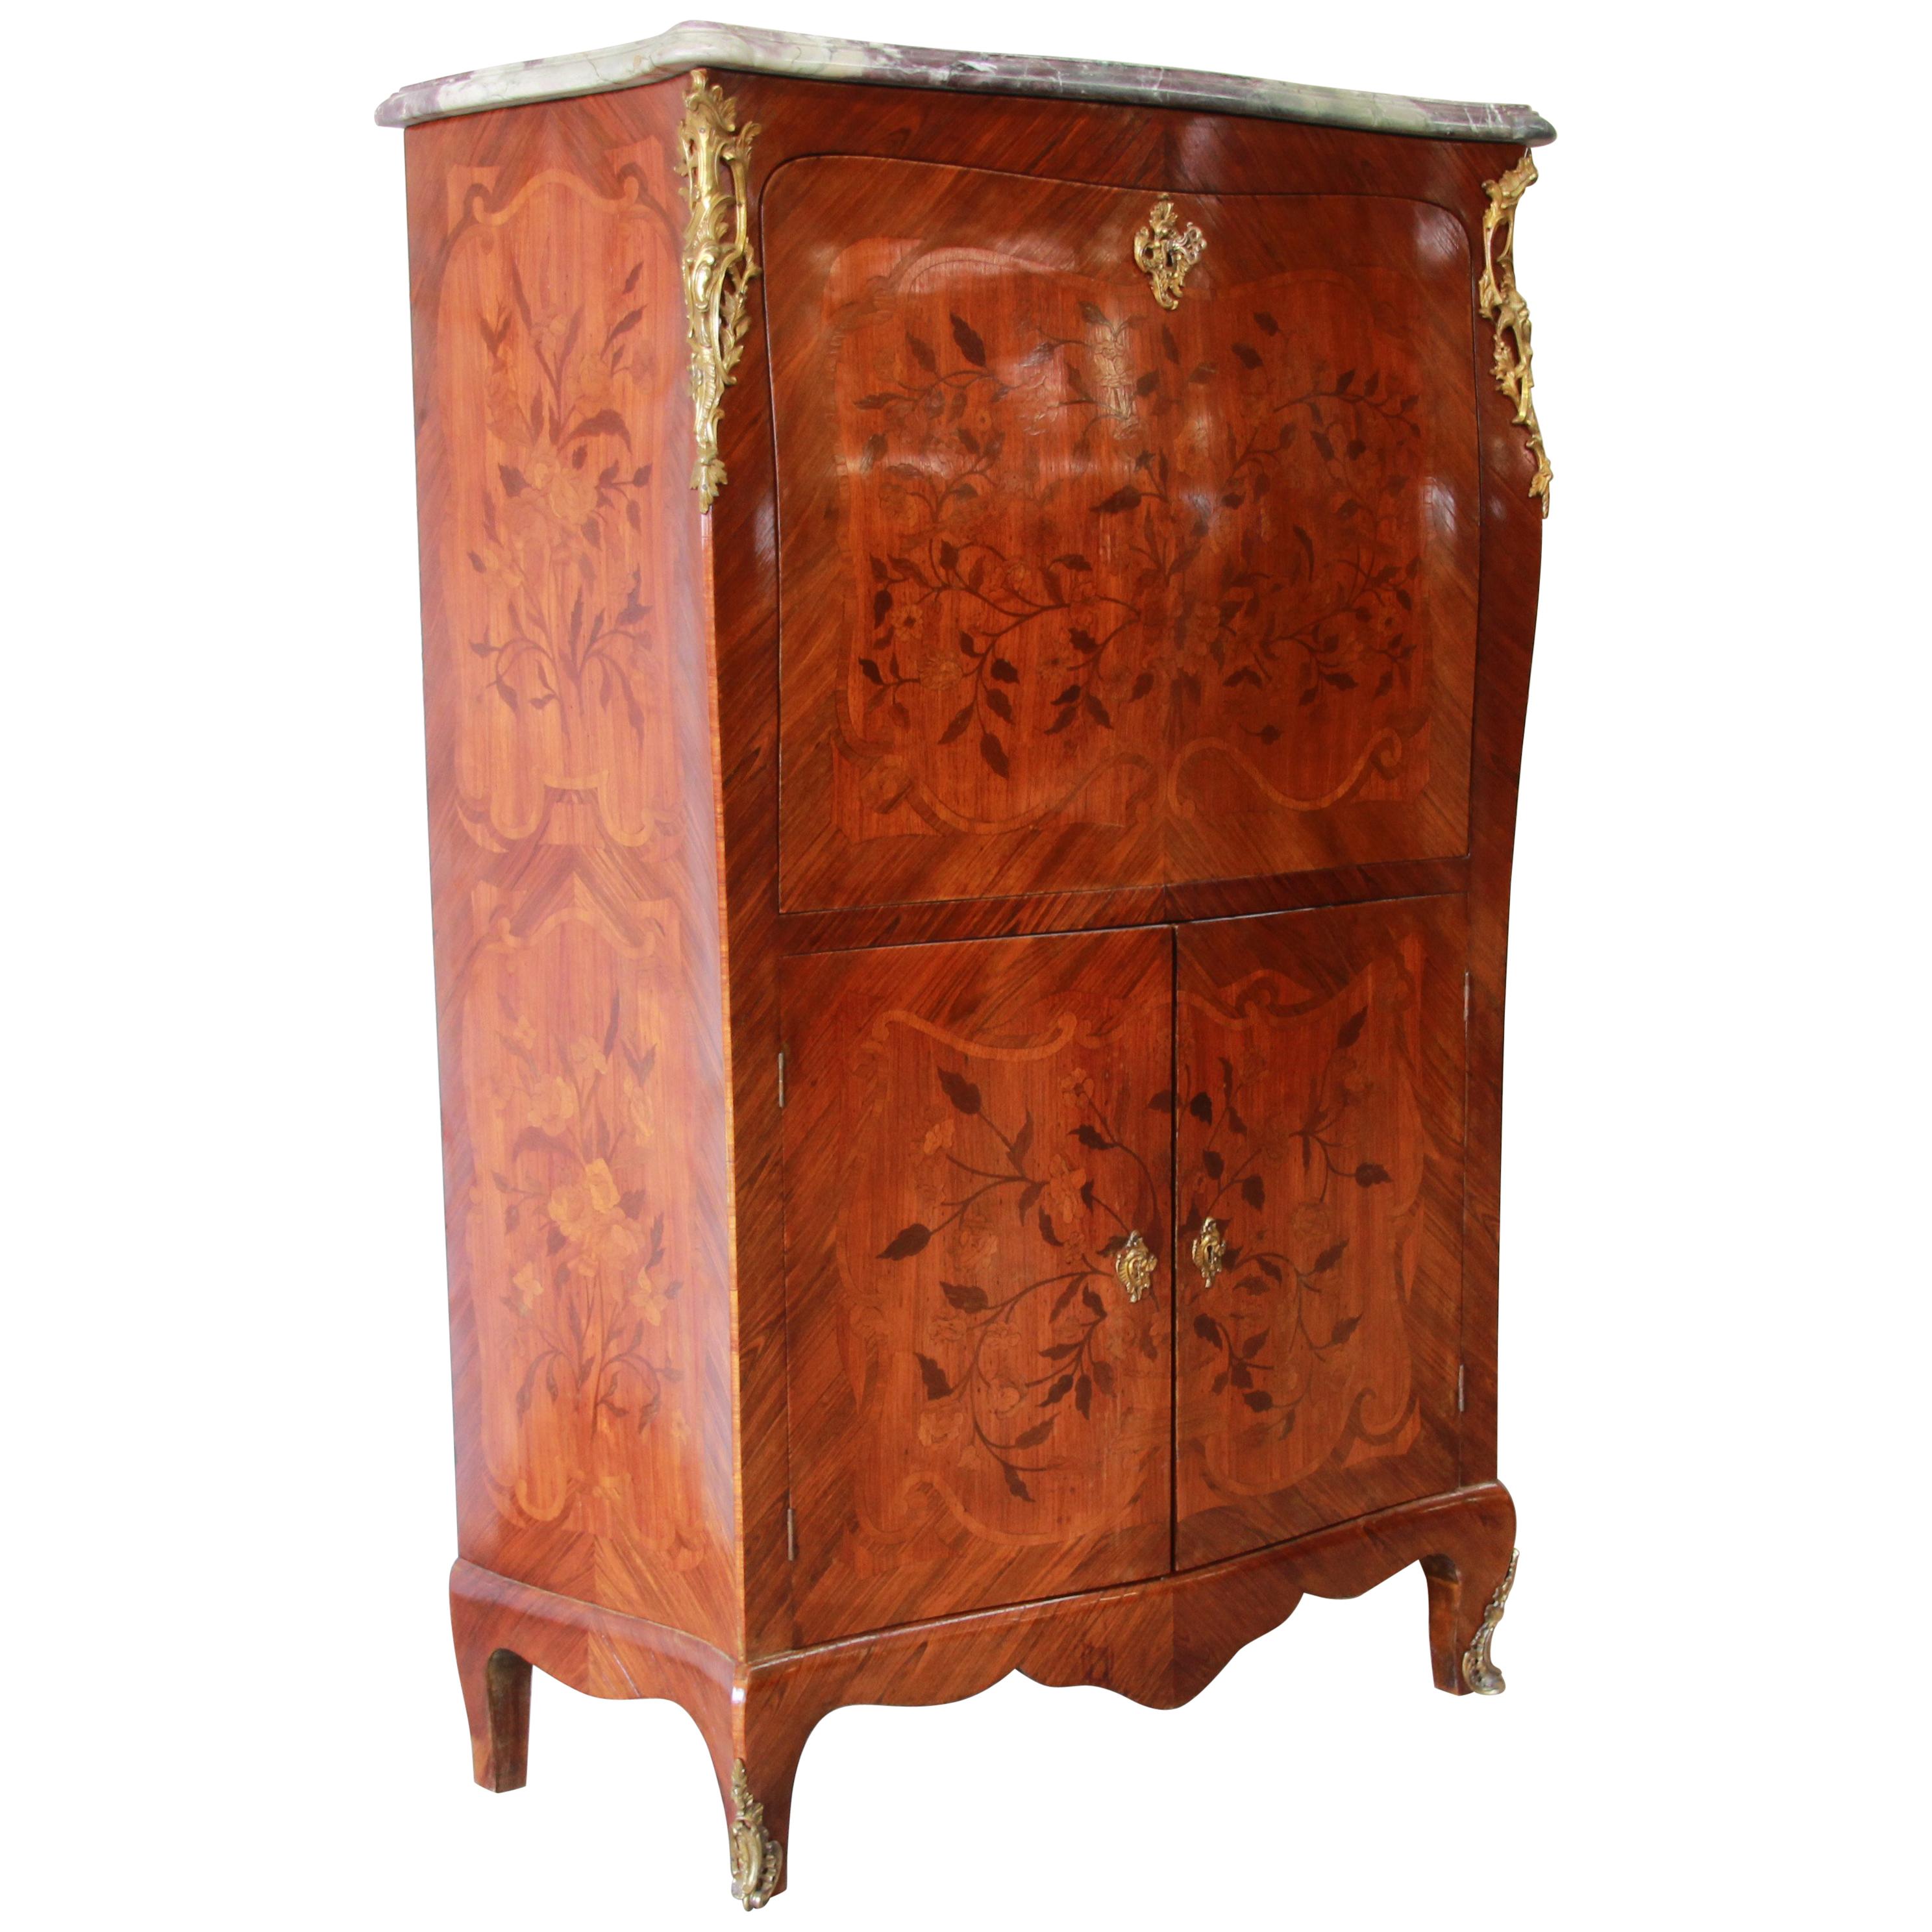 19th Century French Louis XV Style Inlaid Marble Top Abattant Secretaire